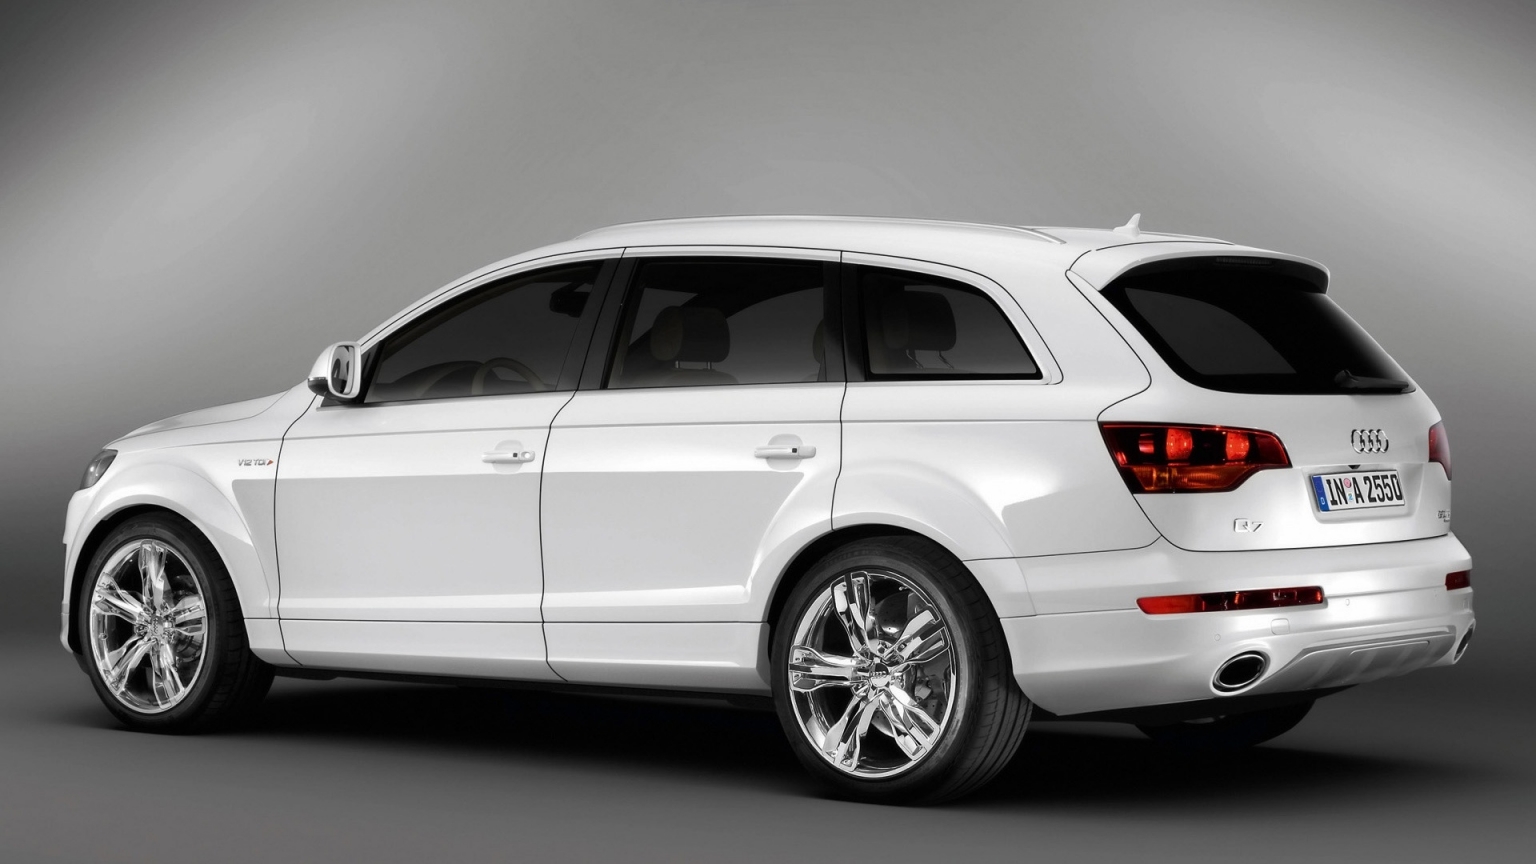 Audi Q7 Coastline Rear and Side for 1536 x 864 HDTV resolution